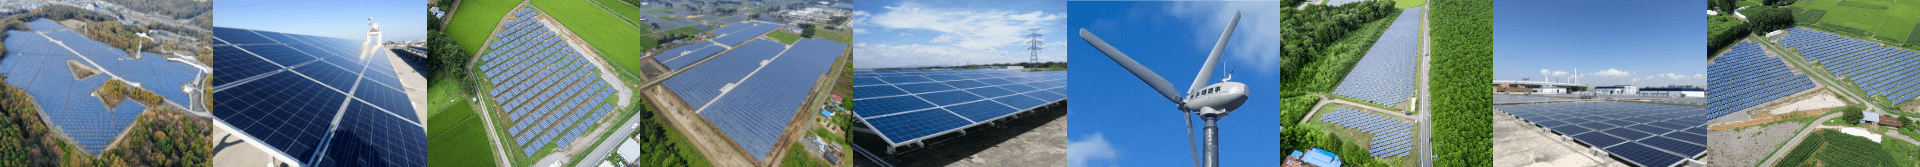 Accomplishments of photovoltaic power stations